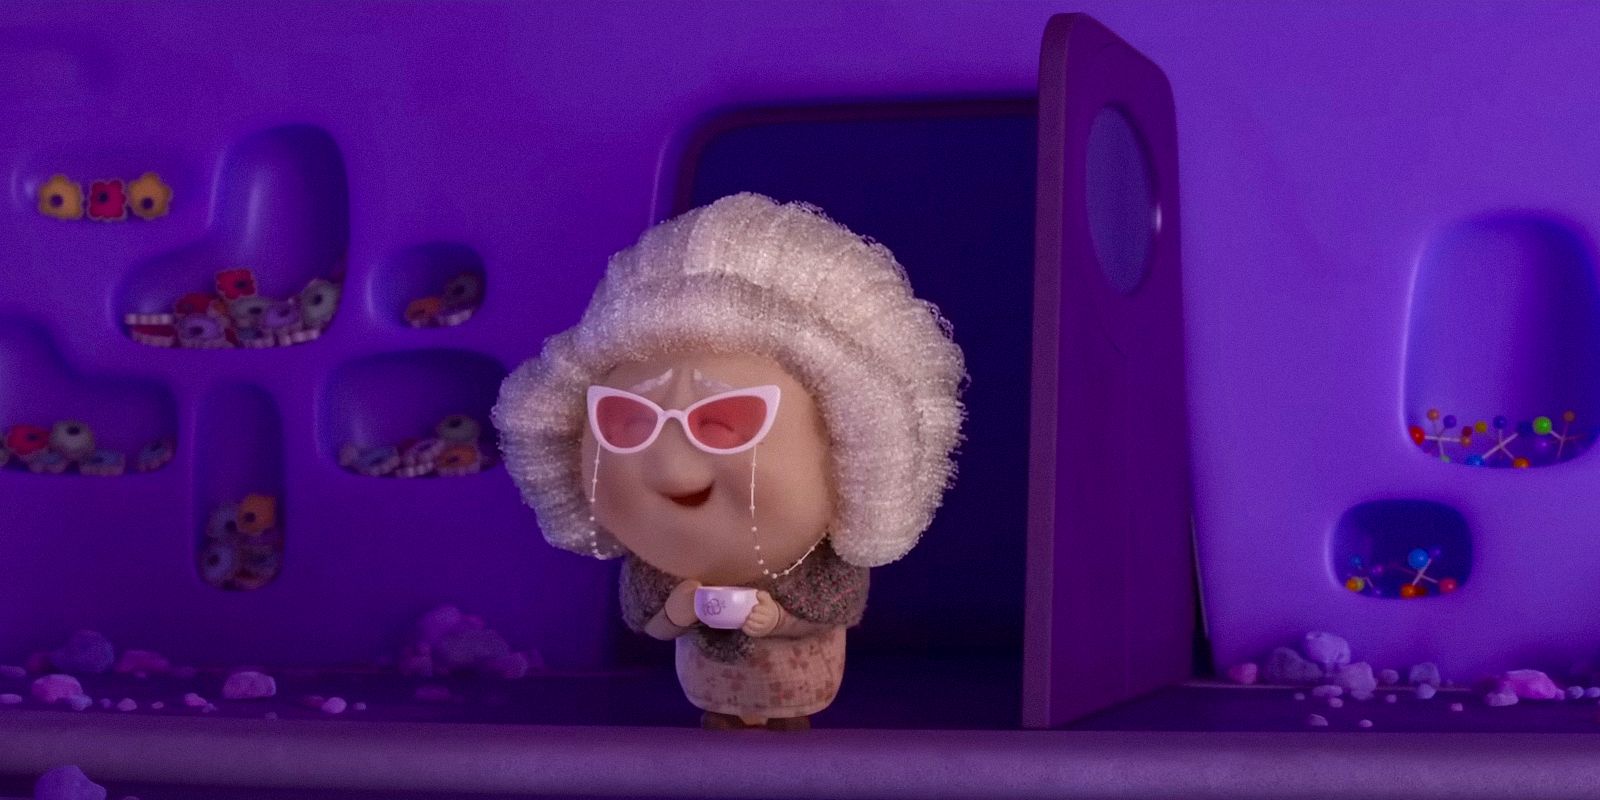 Nostalgia as an old lady with a bun and pink glasses, holding a teacup in Inside Out 2